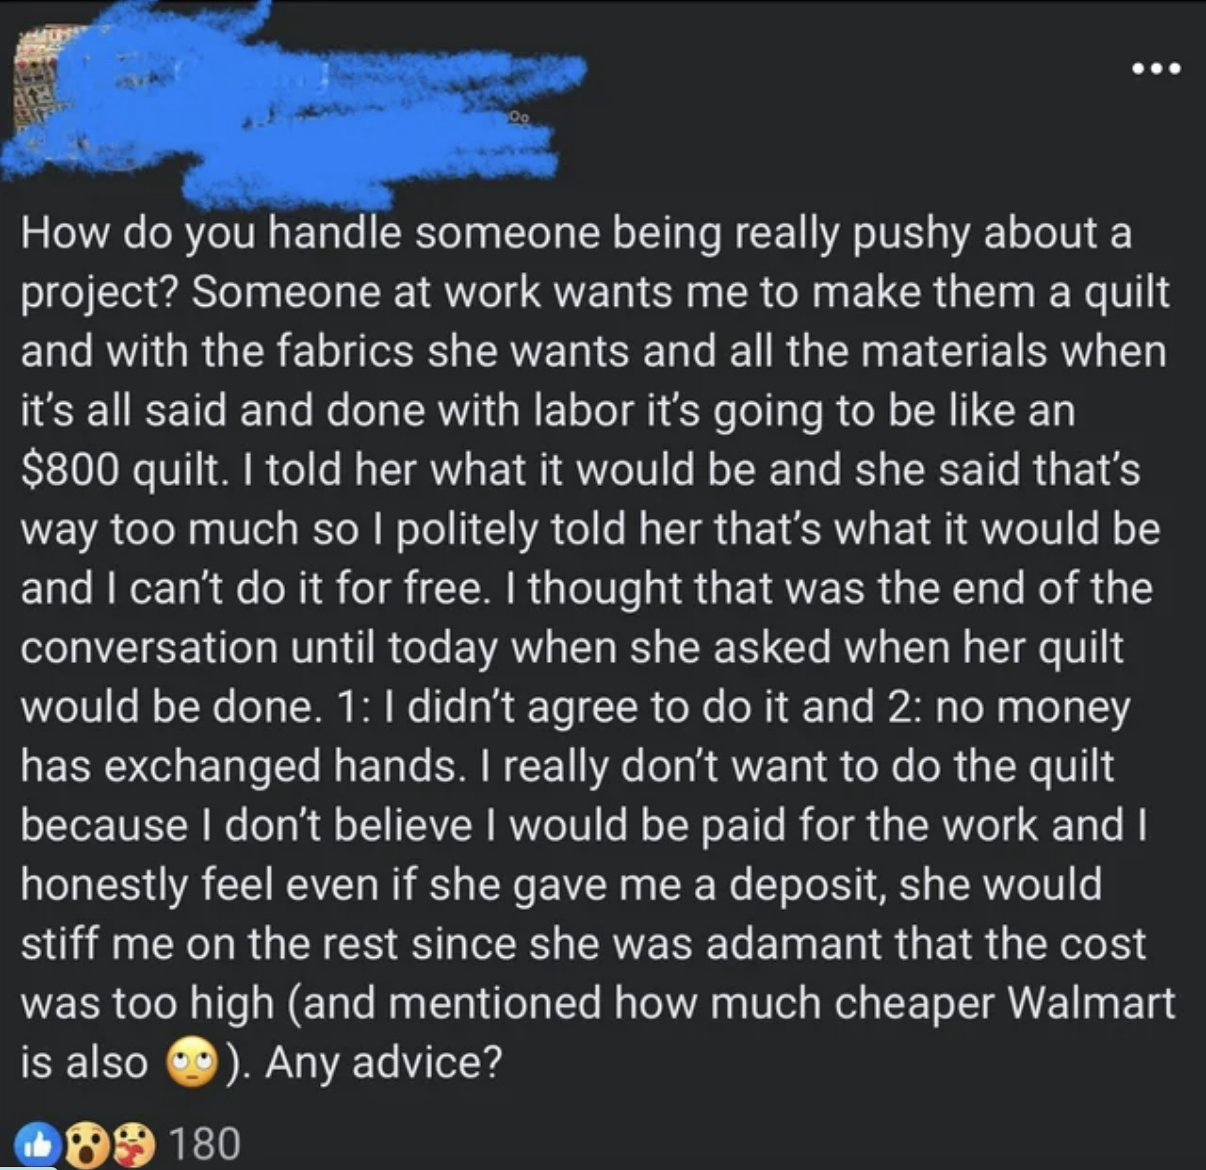 &quot;Any advice?&quot;